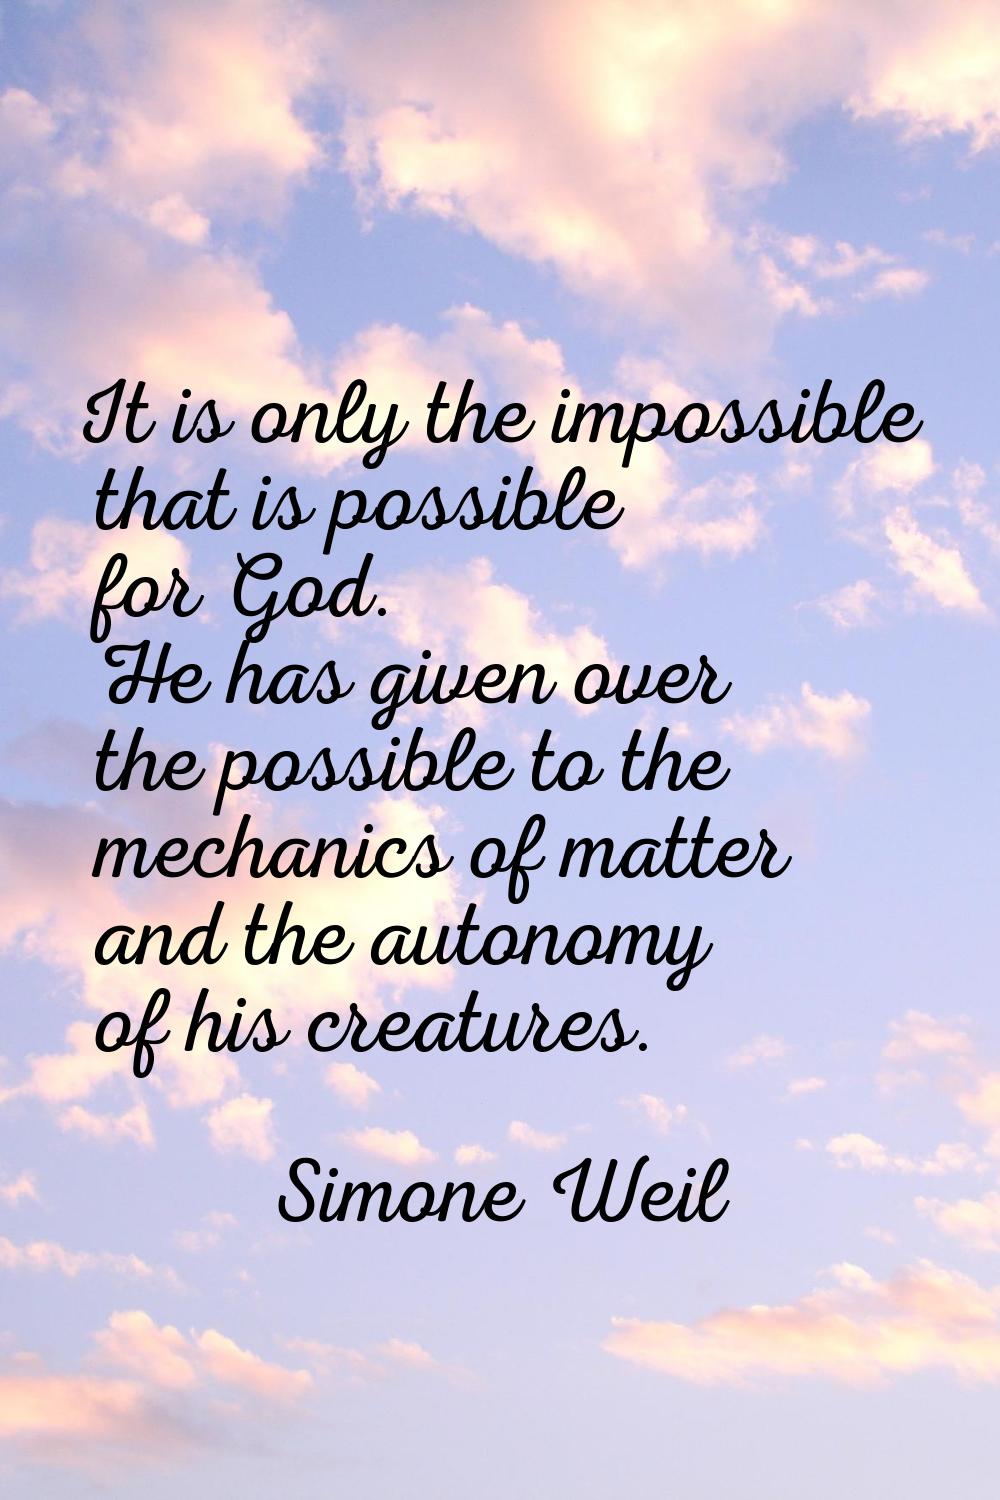 It is only the impossible that is possible for God. He has given over the possible to the mechanics